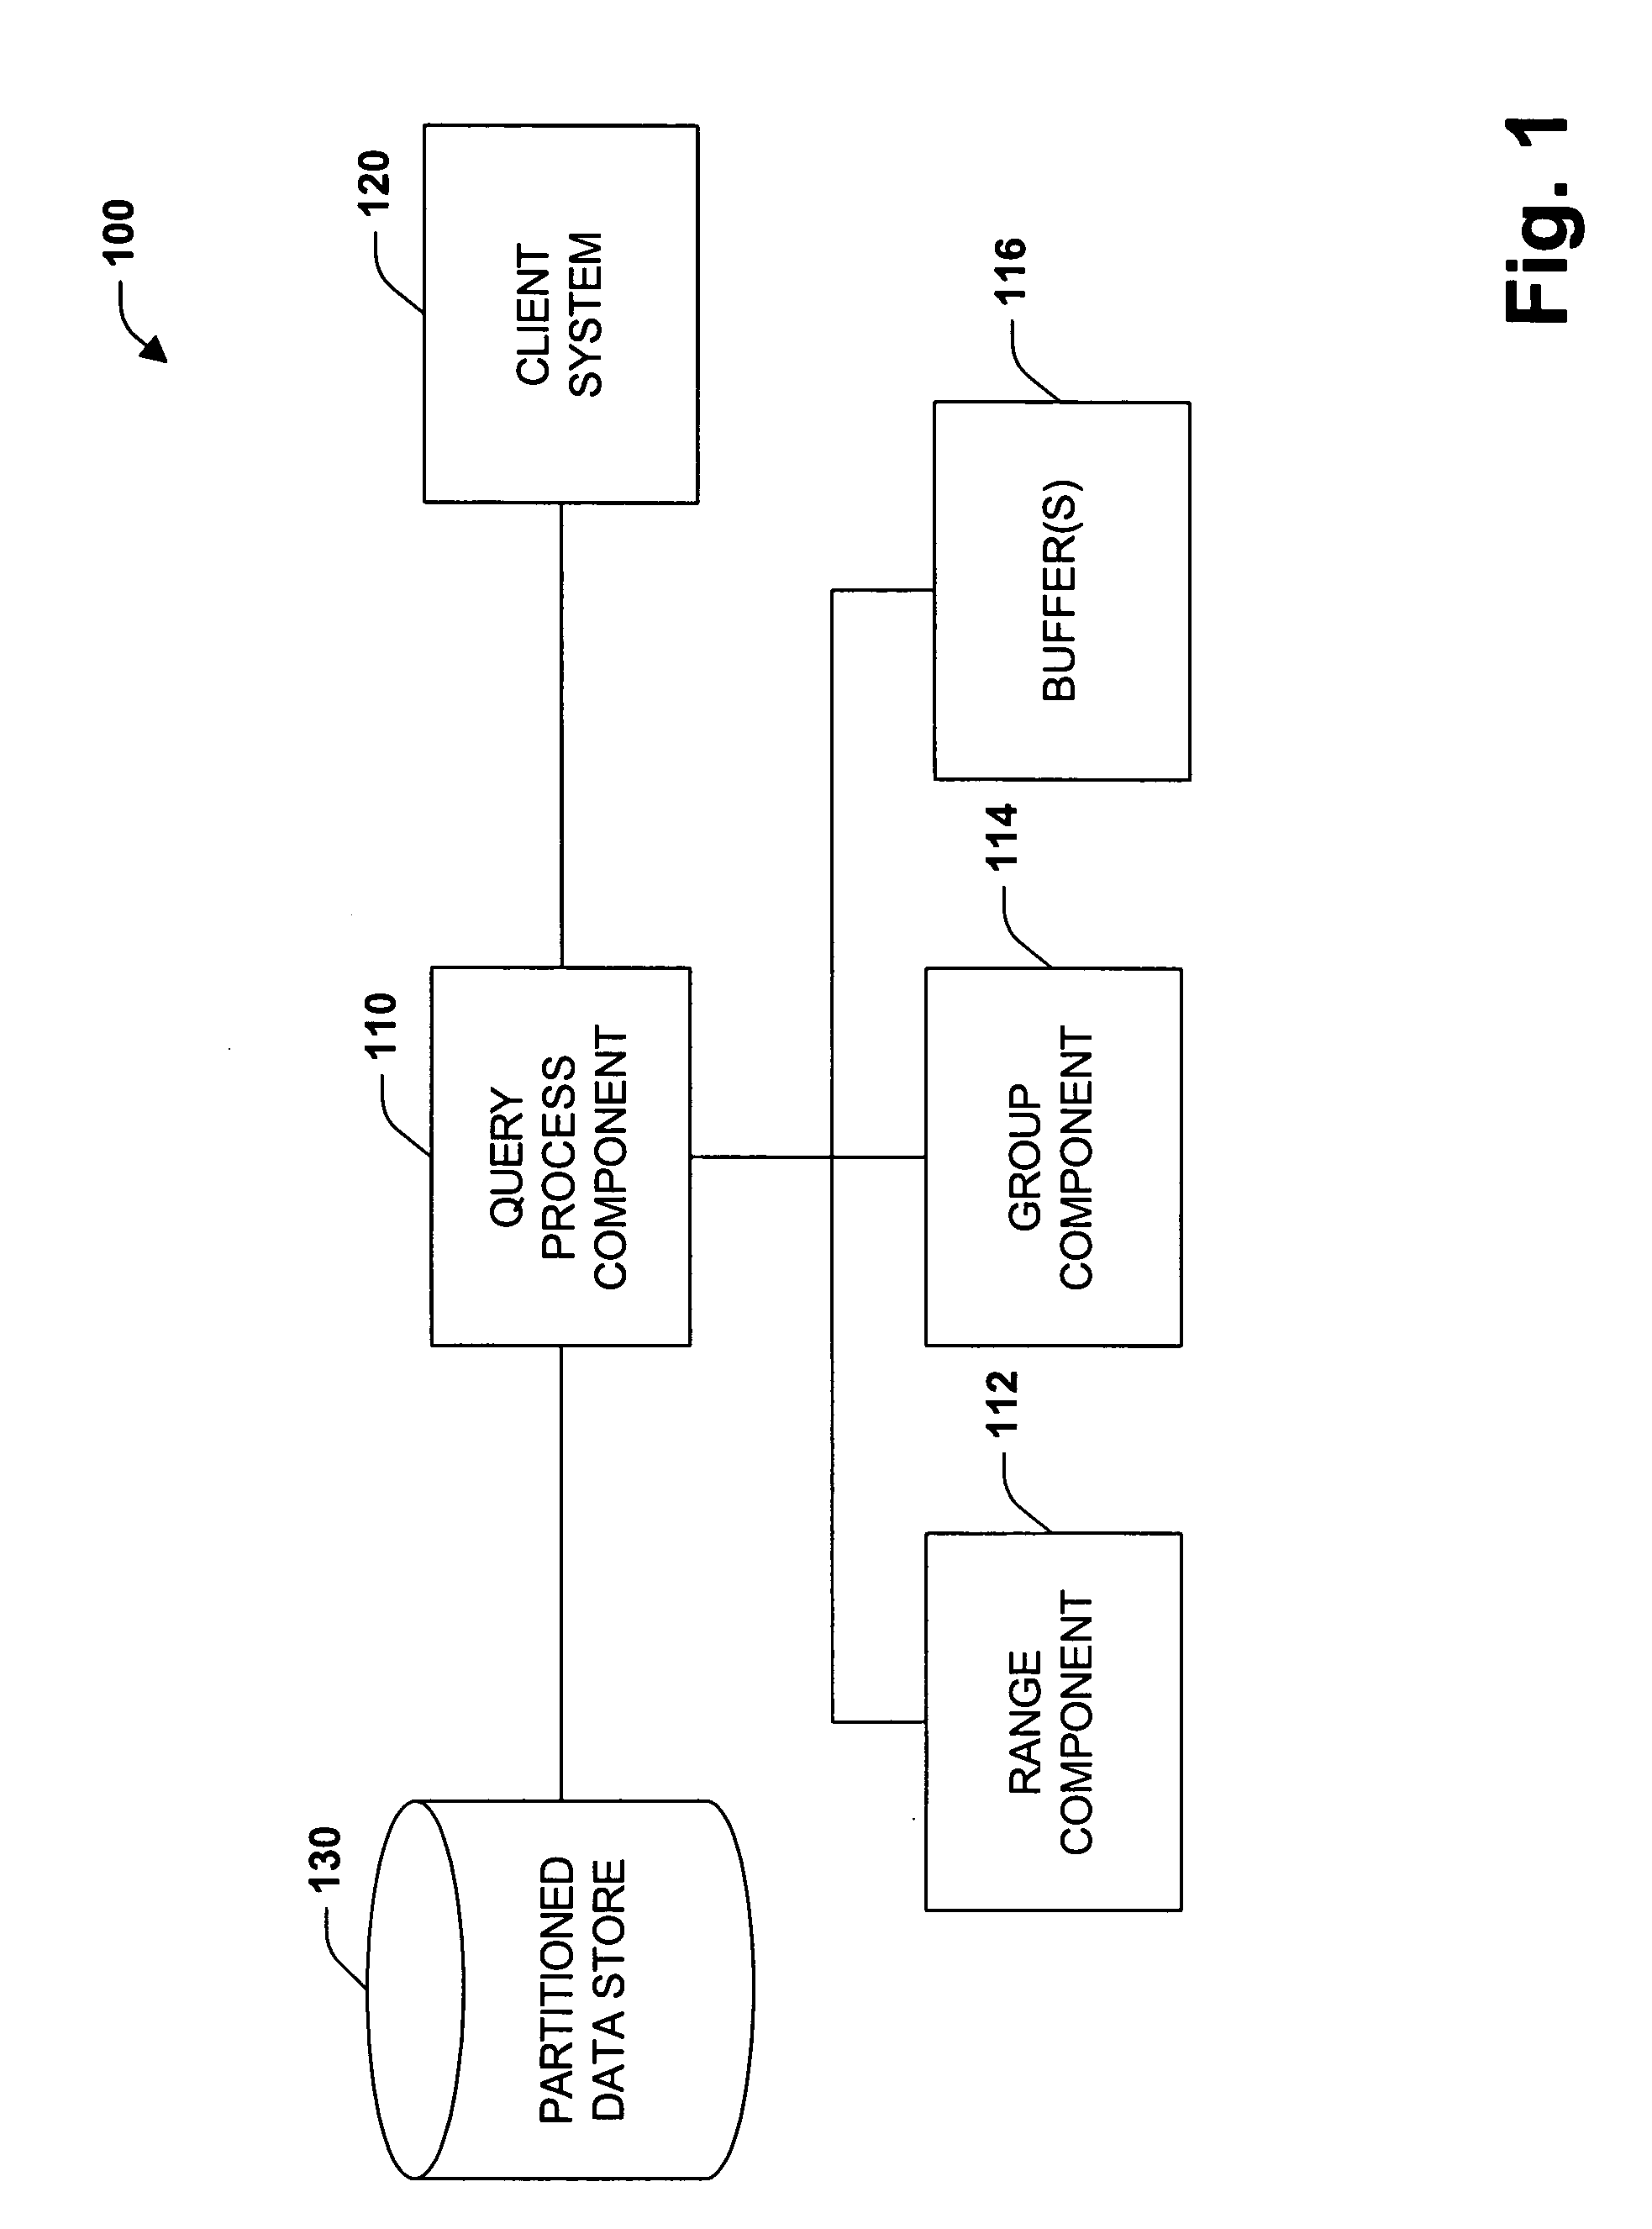 Optimized distinct count query system and method